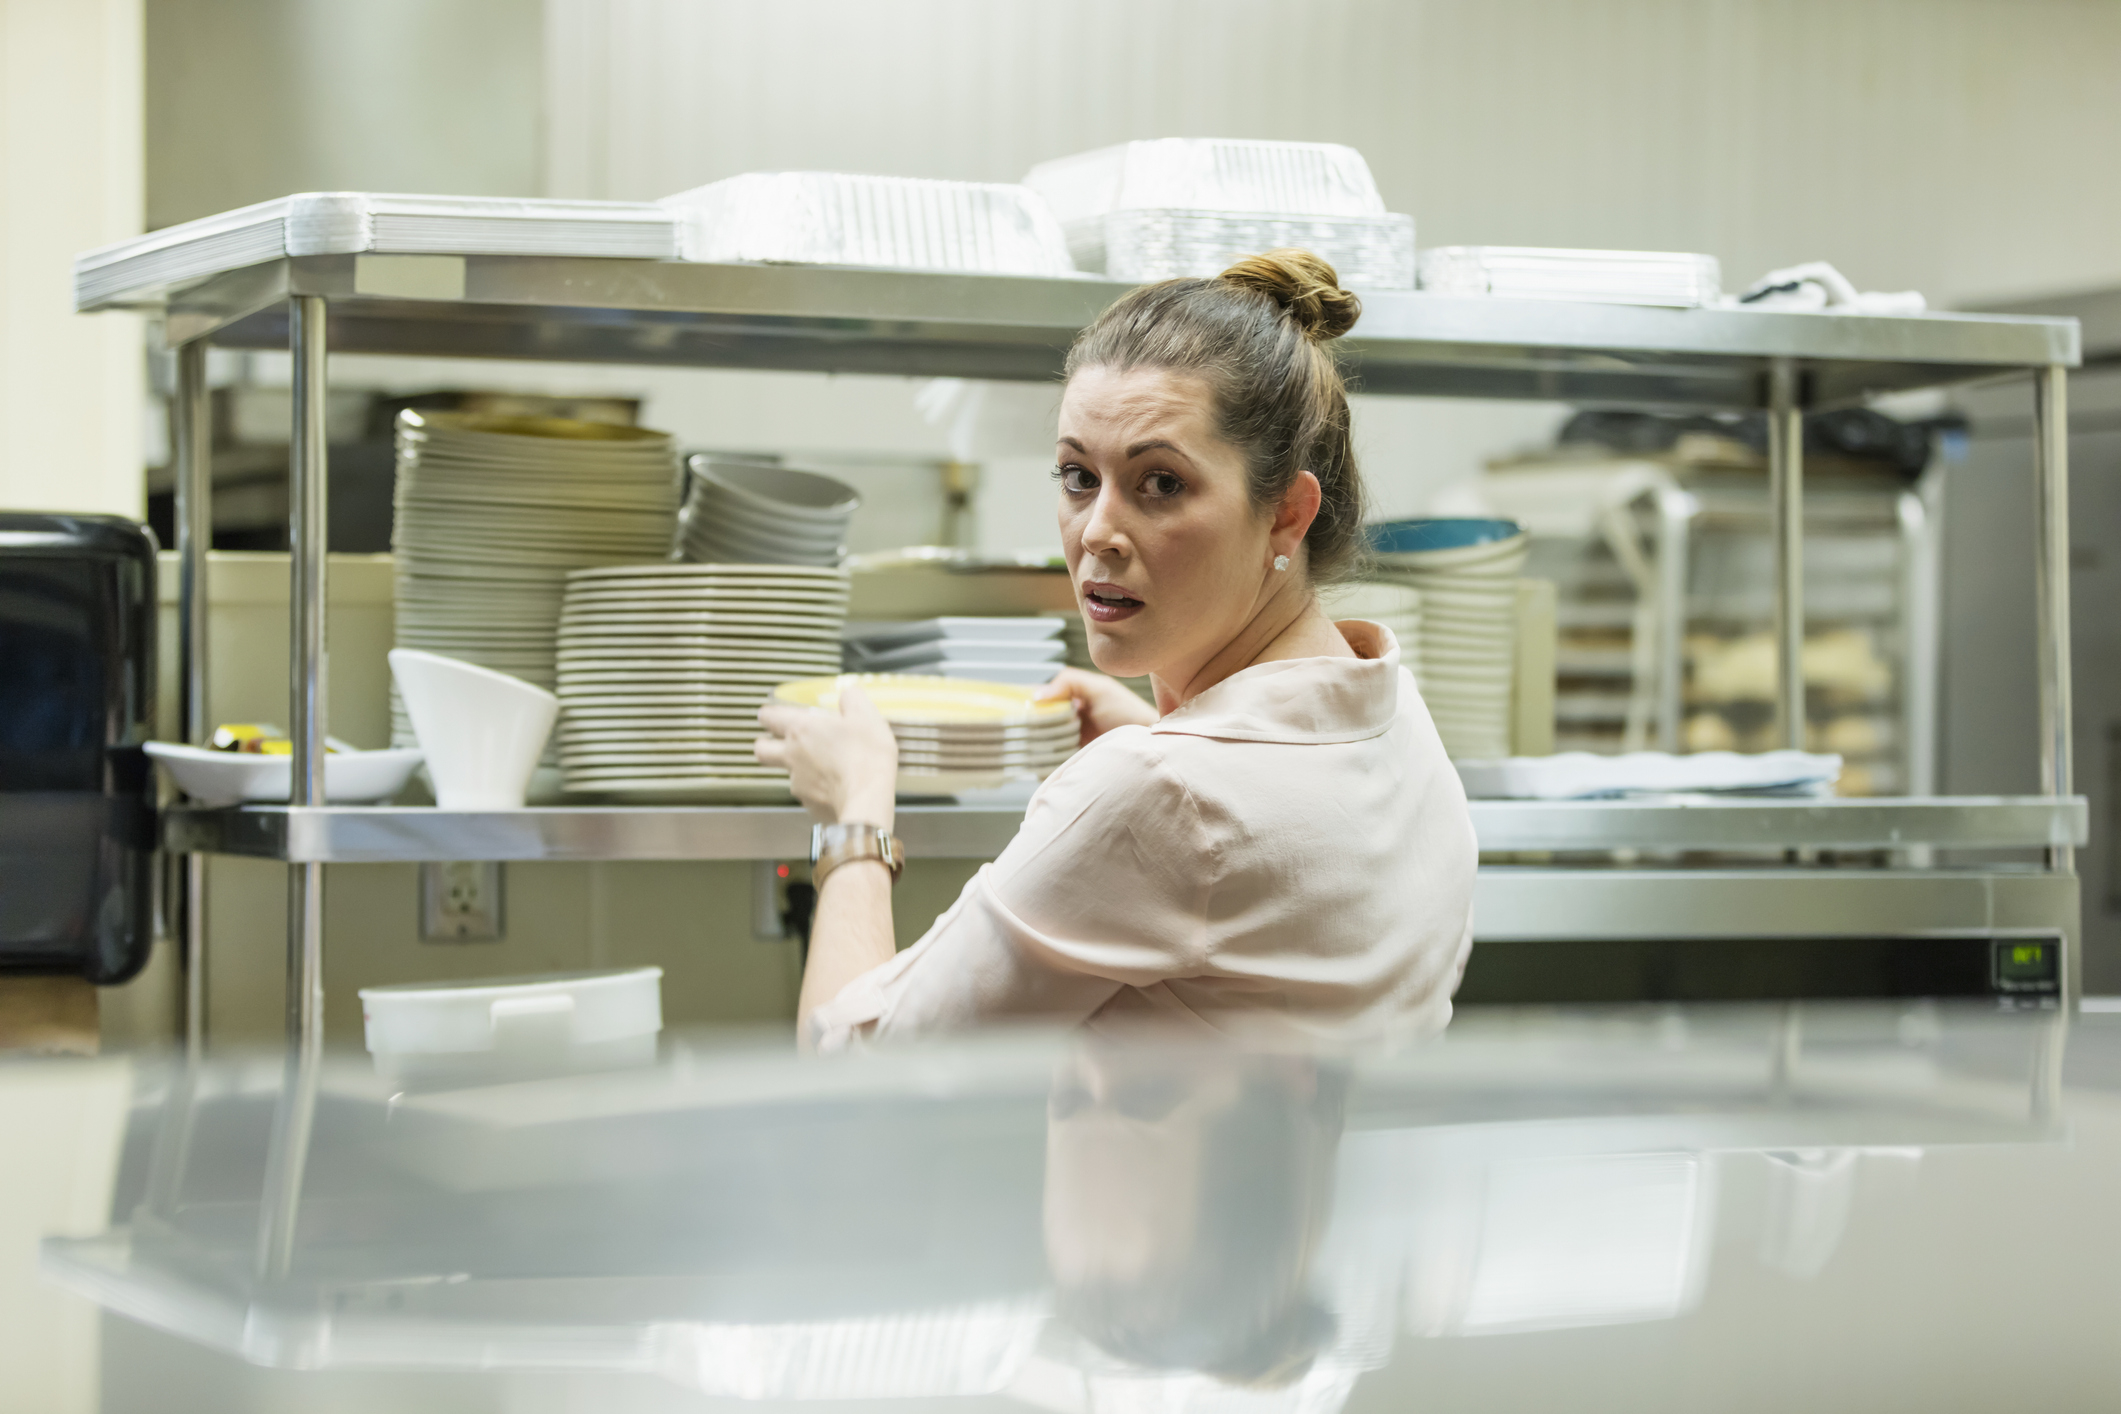 A woman in a restaurant kitchen grabbing plates